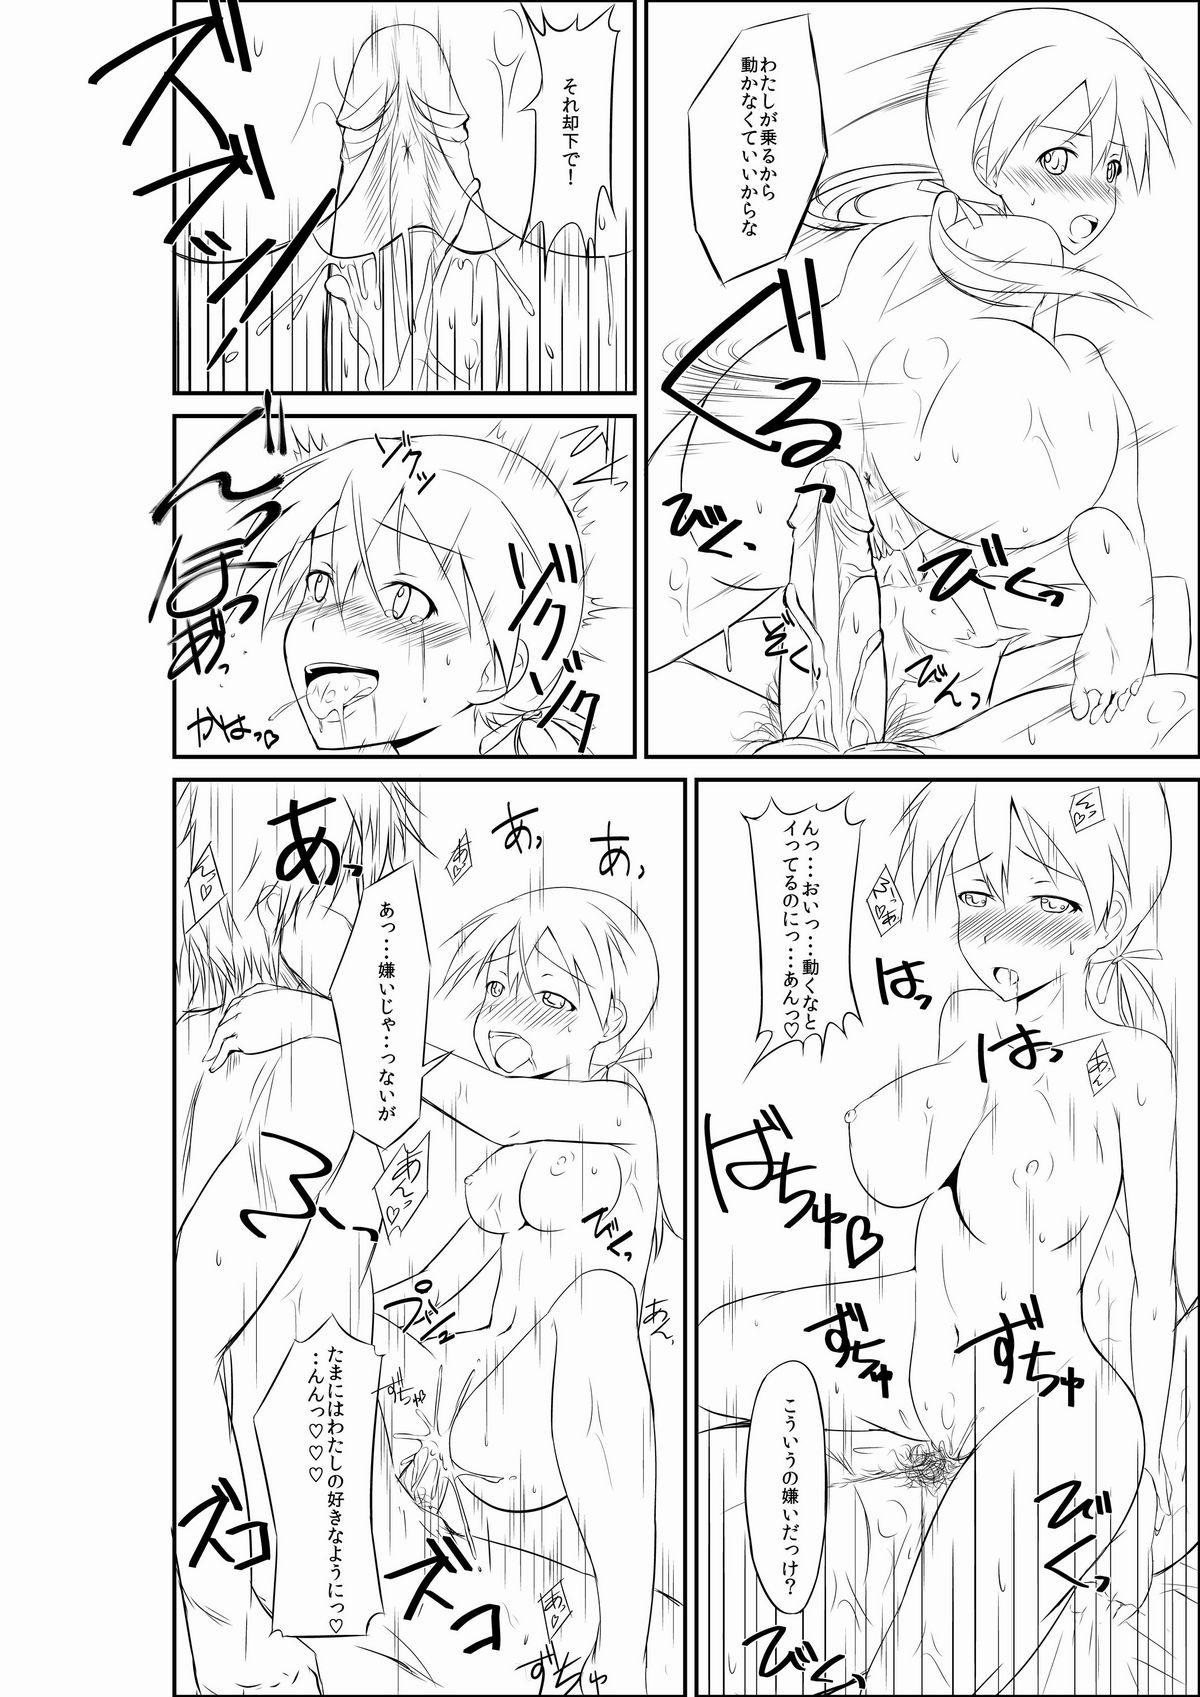 Beach 練習 お姉ちゃんとヘルマちゃん - Strike witches Amateur Cumshots - Page 6